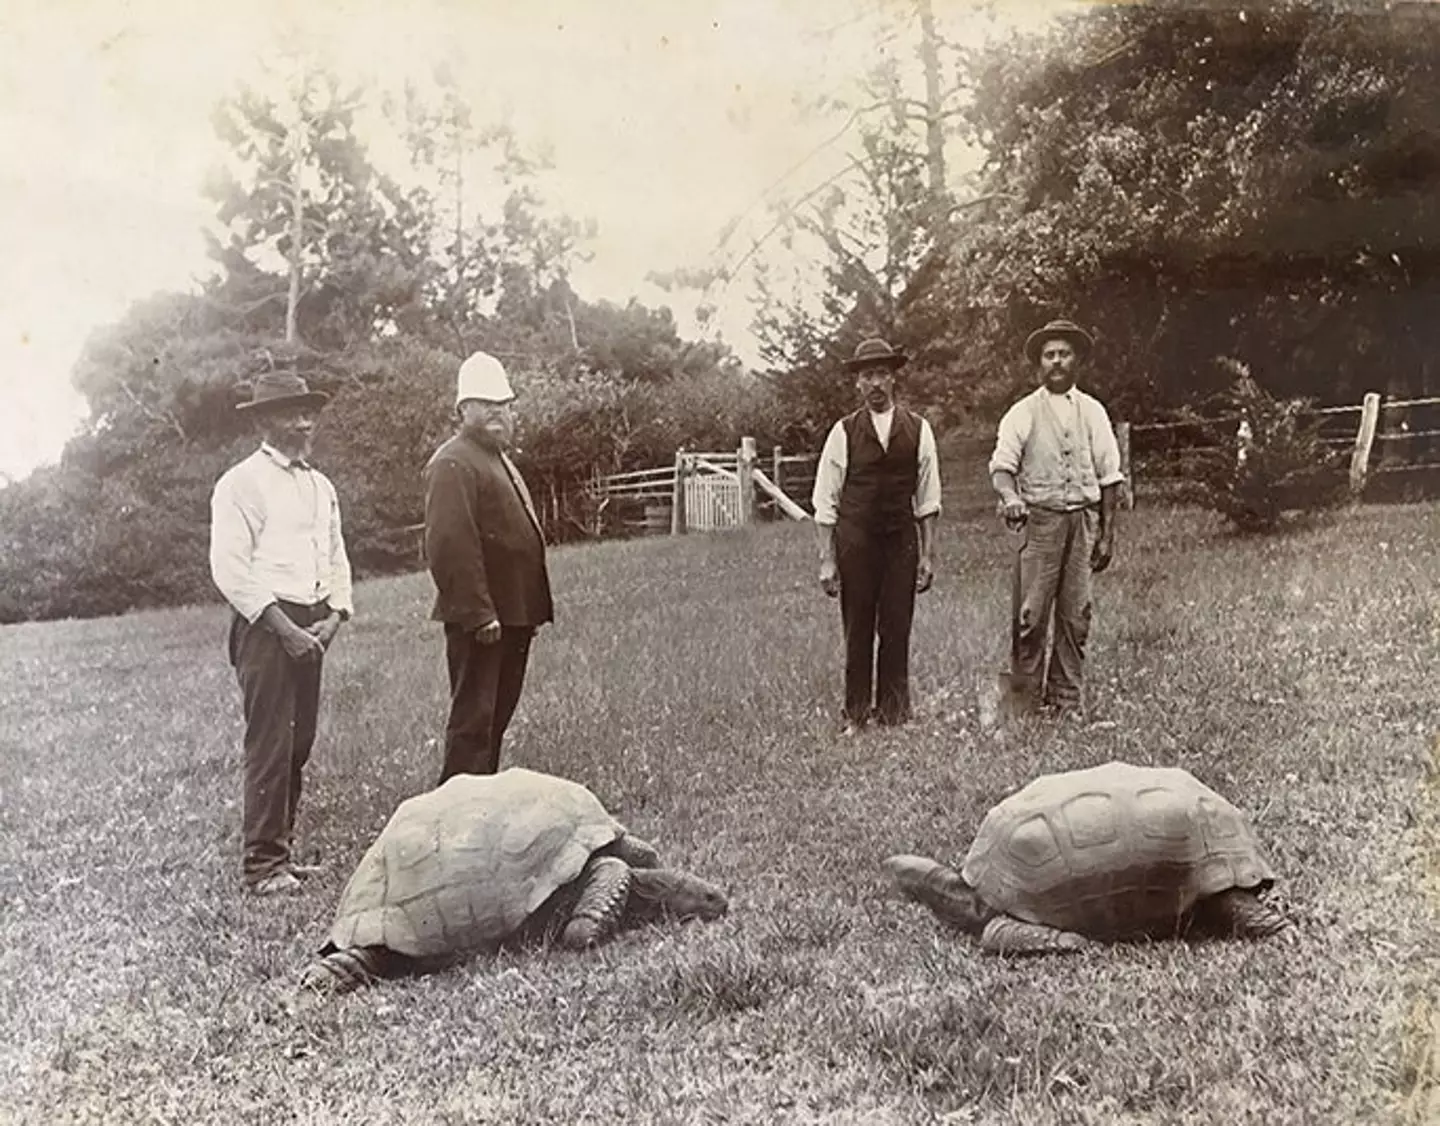 Jonathan, pictured left, around 1882-86 on the grounds of Plantation House, St Helena. (Guinness World Records)